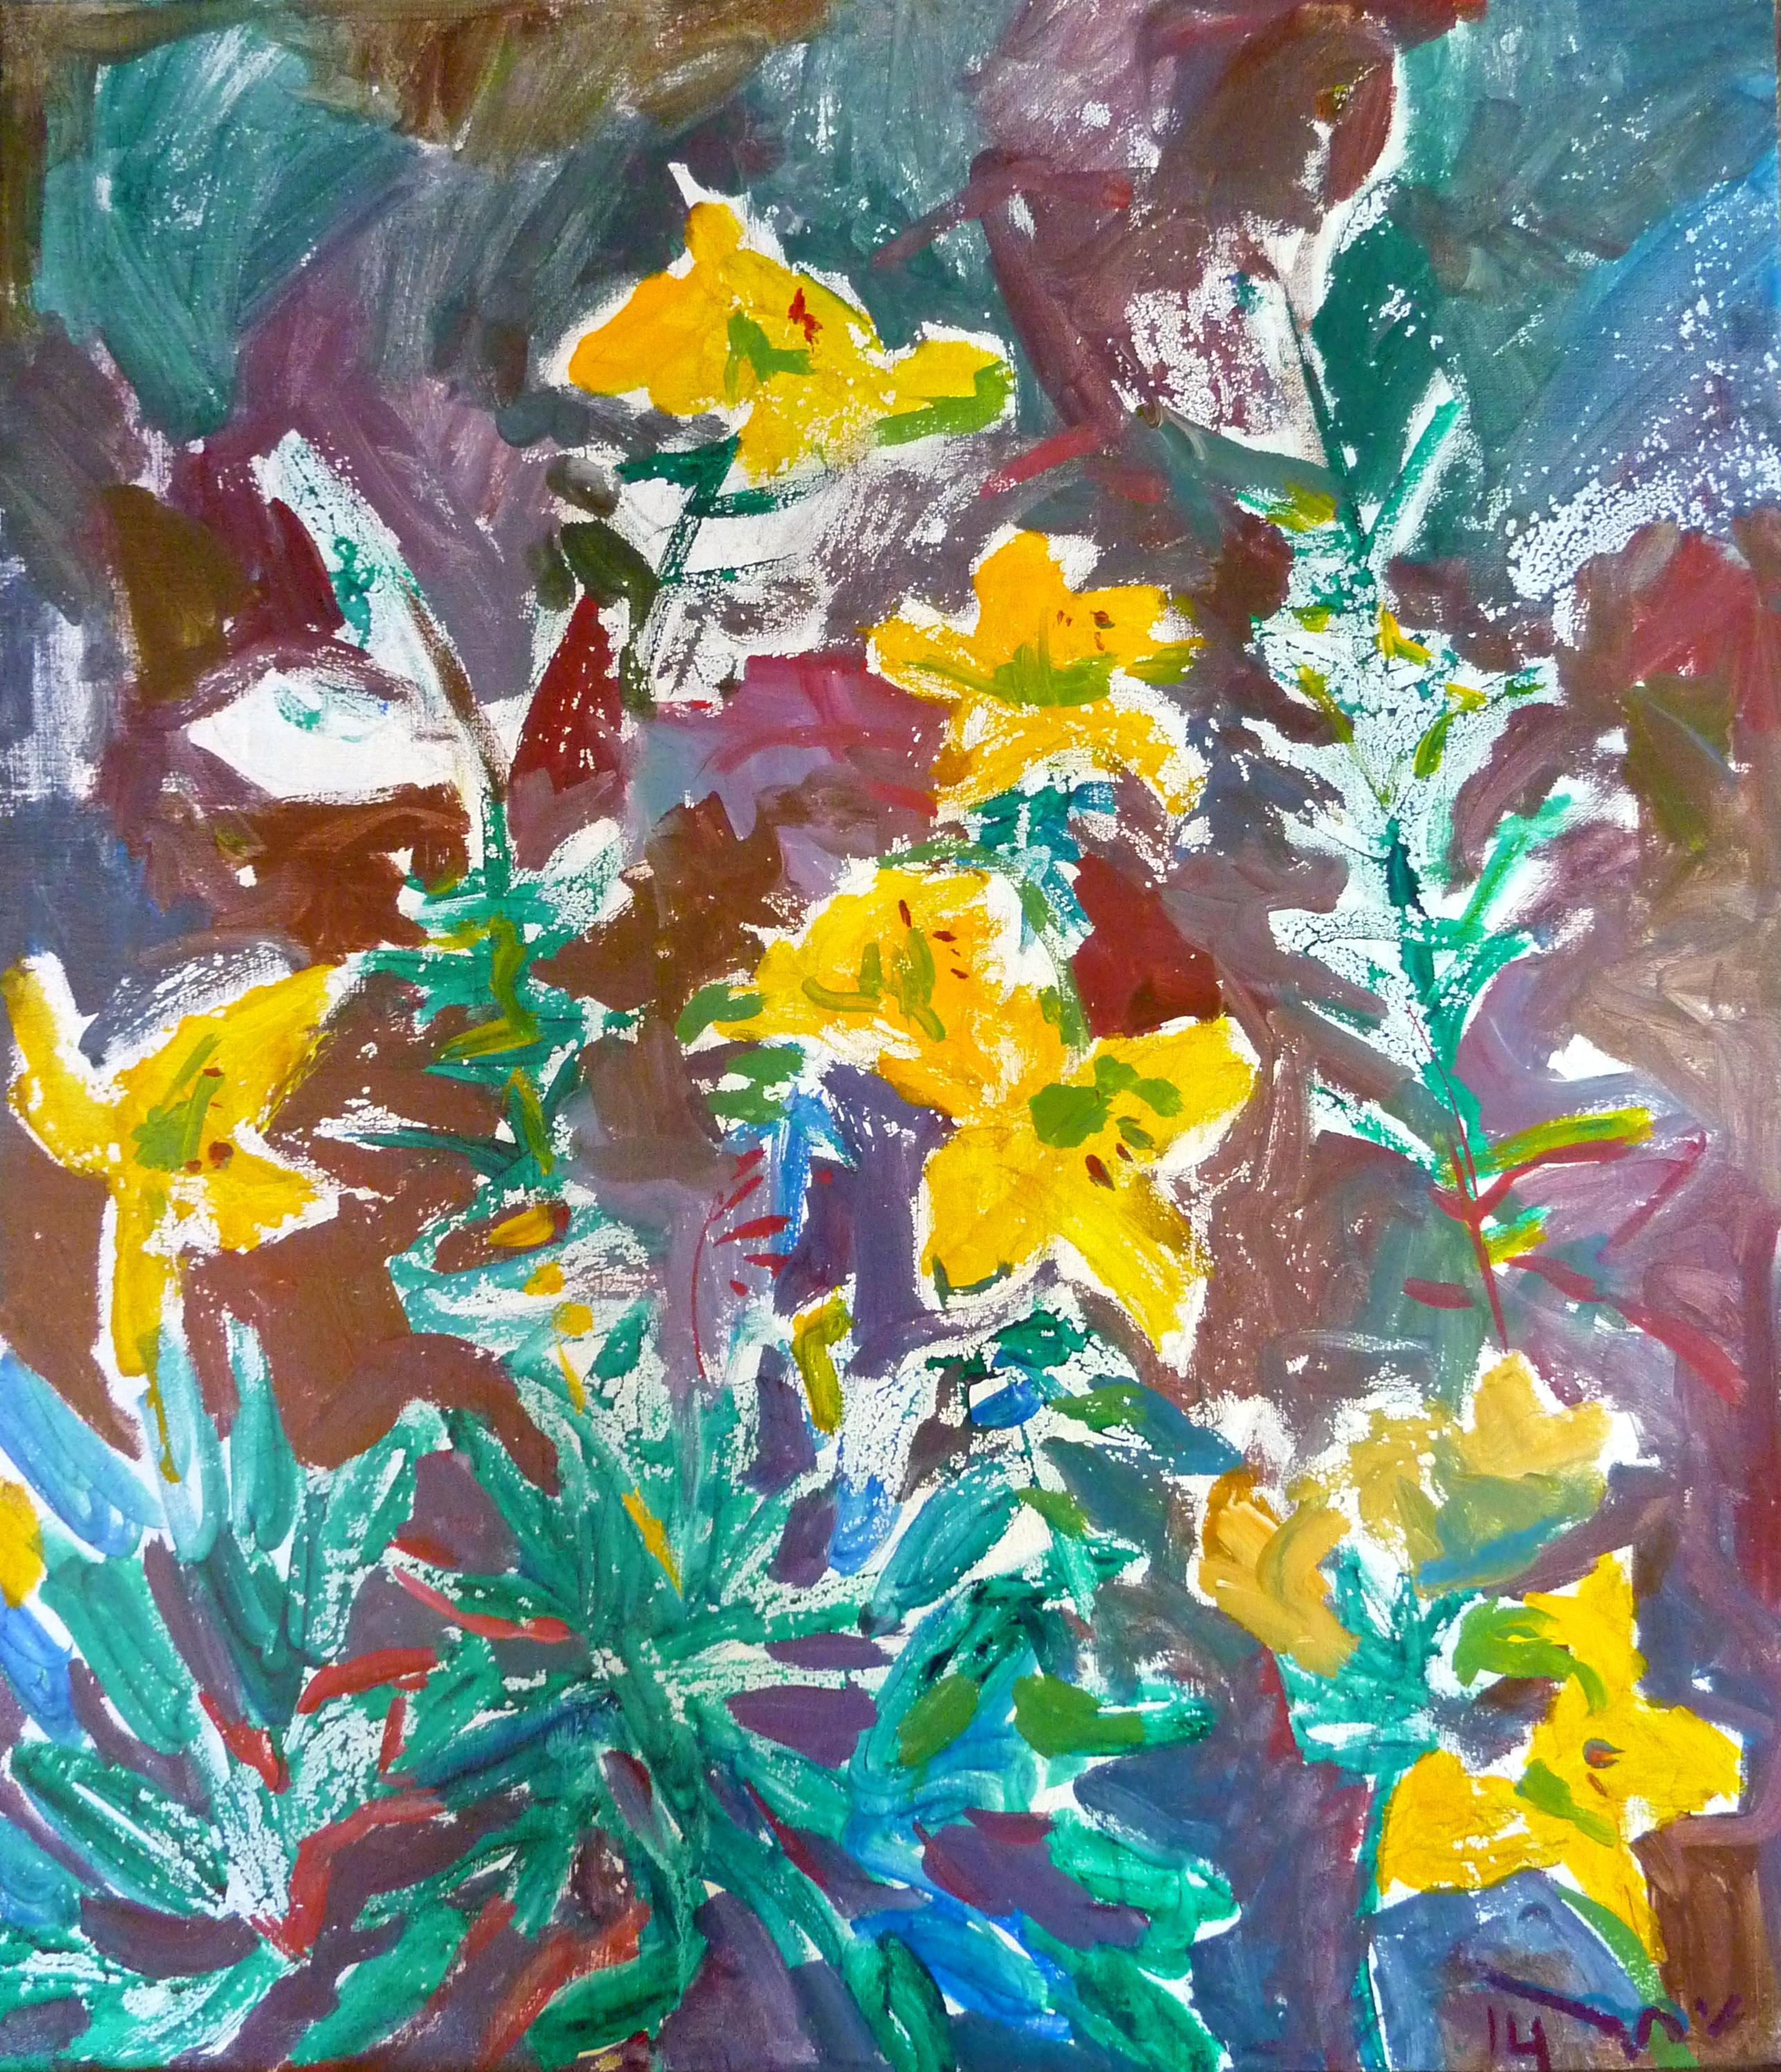 Nikol Klampert Landscape Painting - Yellow Flowers at the Gardening - 21st Century Contemporary Fauvist Oil Painting